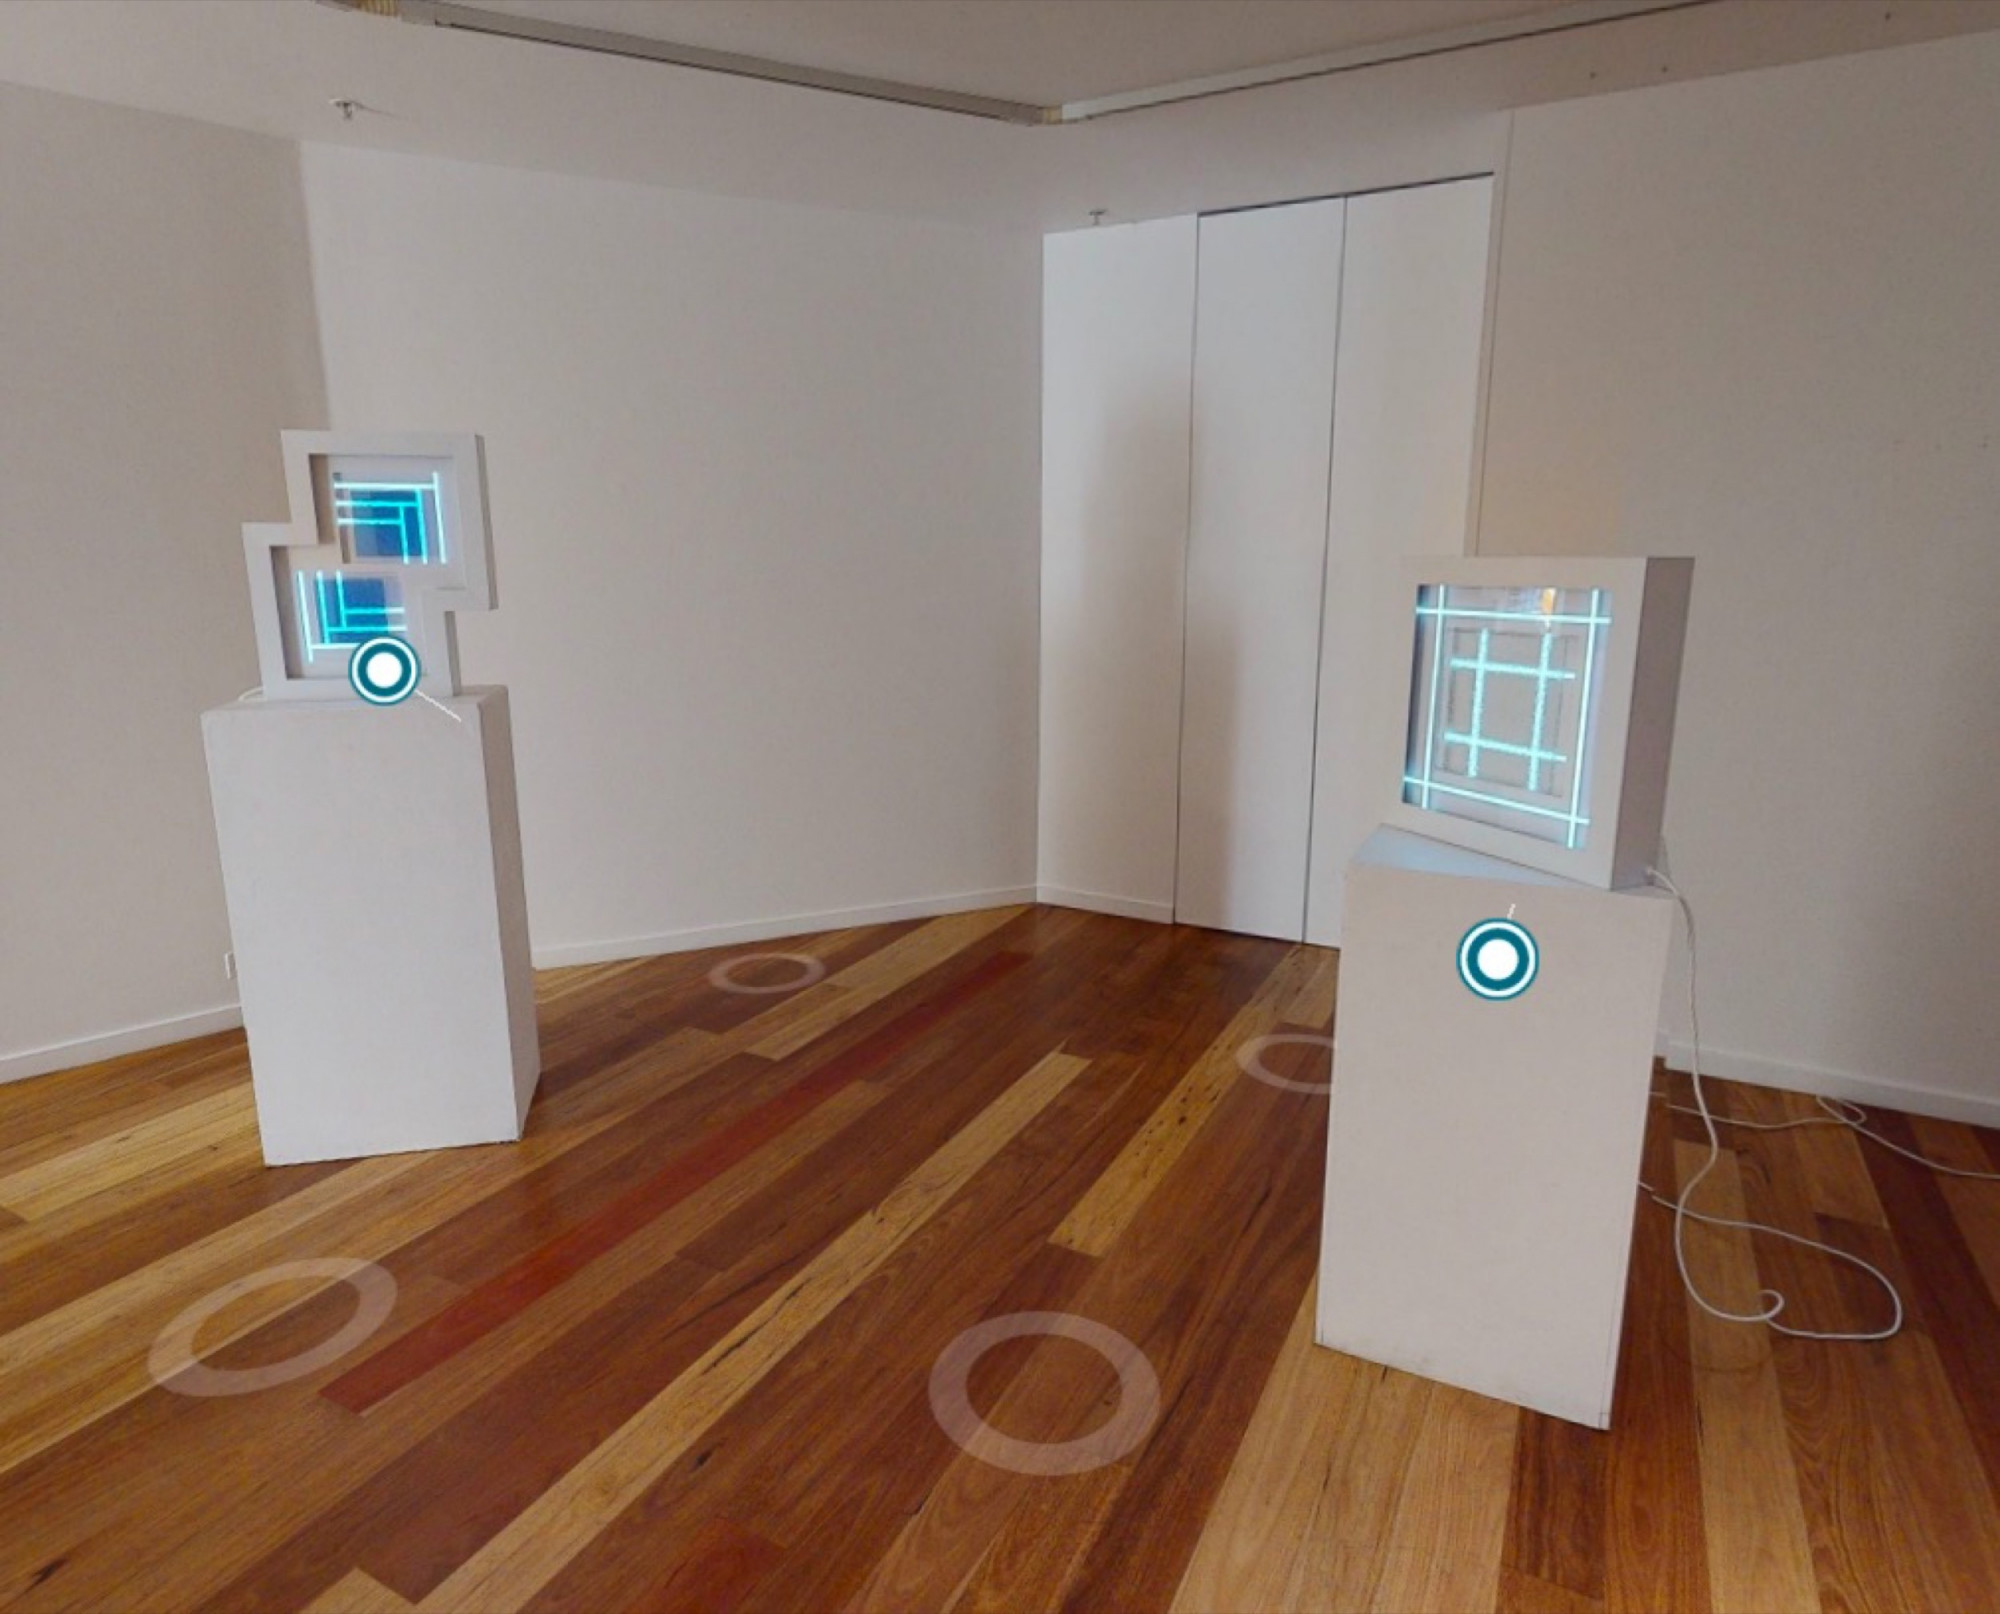 Meagan Streader, A Window is a Square Horizon, 2020. Screenshot of virtual exhibition experience. (left to right) Meagan Streader, Blue, parquetry, 2020. Ripple glass, electroluminescent tape, aluminium, enamel, acrylic, foam core, electronic components, 60 x 50 x 10 cm; Meagan Streader, Tower, tunnel, 2020. Ripple glass, electroluminescent tape, aluminium, enamel, acrylic, foam core, electronic components, 50 x 50 x 10 cm.